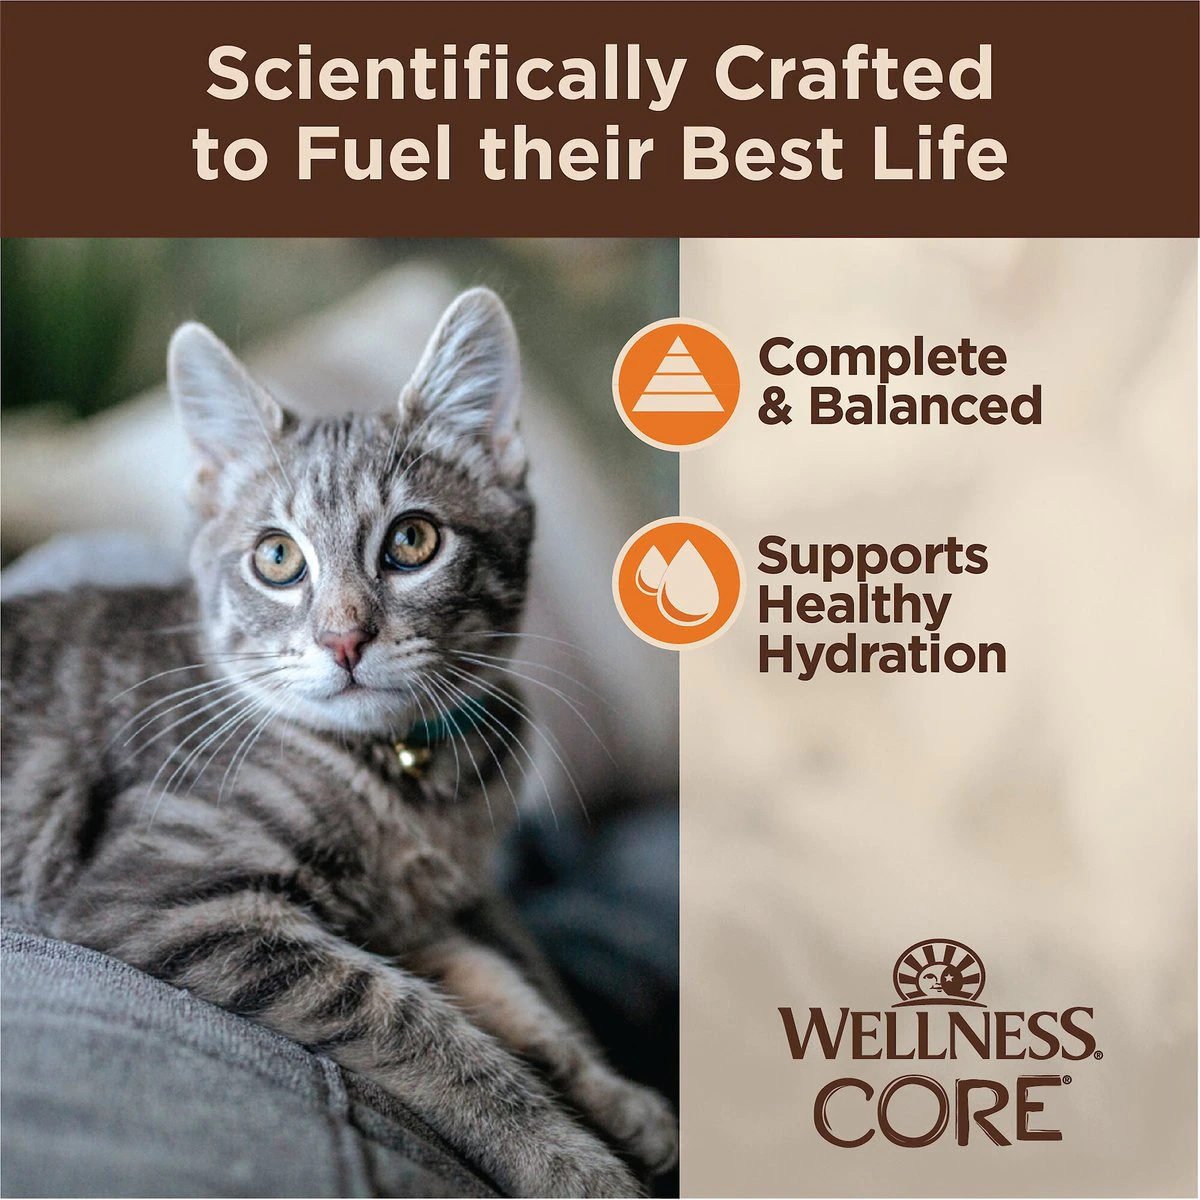 Wellness CORE Tiny Tasters Minced Chicken in Gravy Wet Cat Food  Canned Cat Food  | PetMax Canada